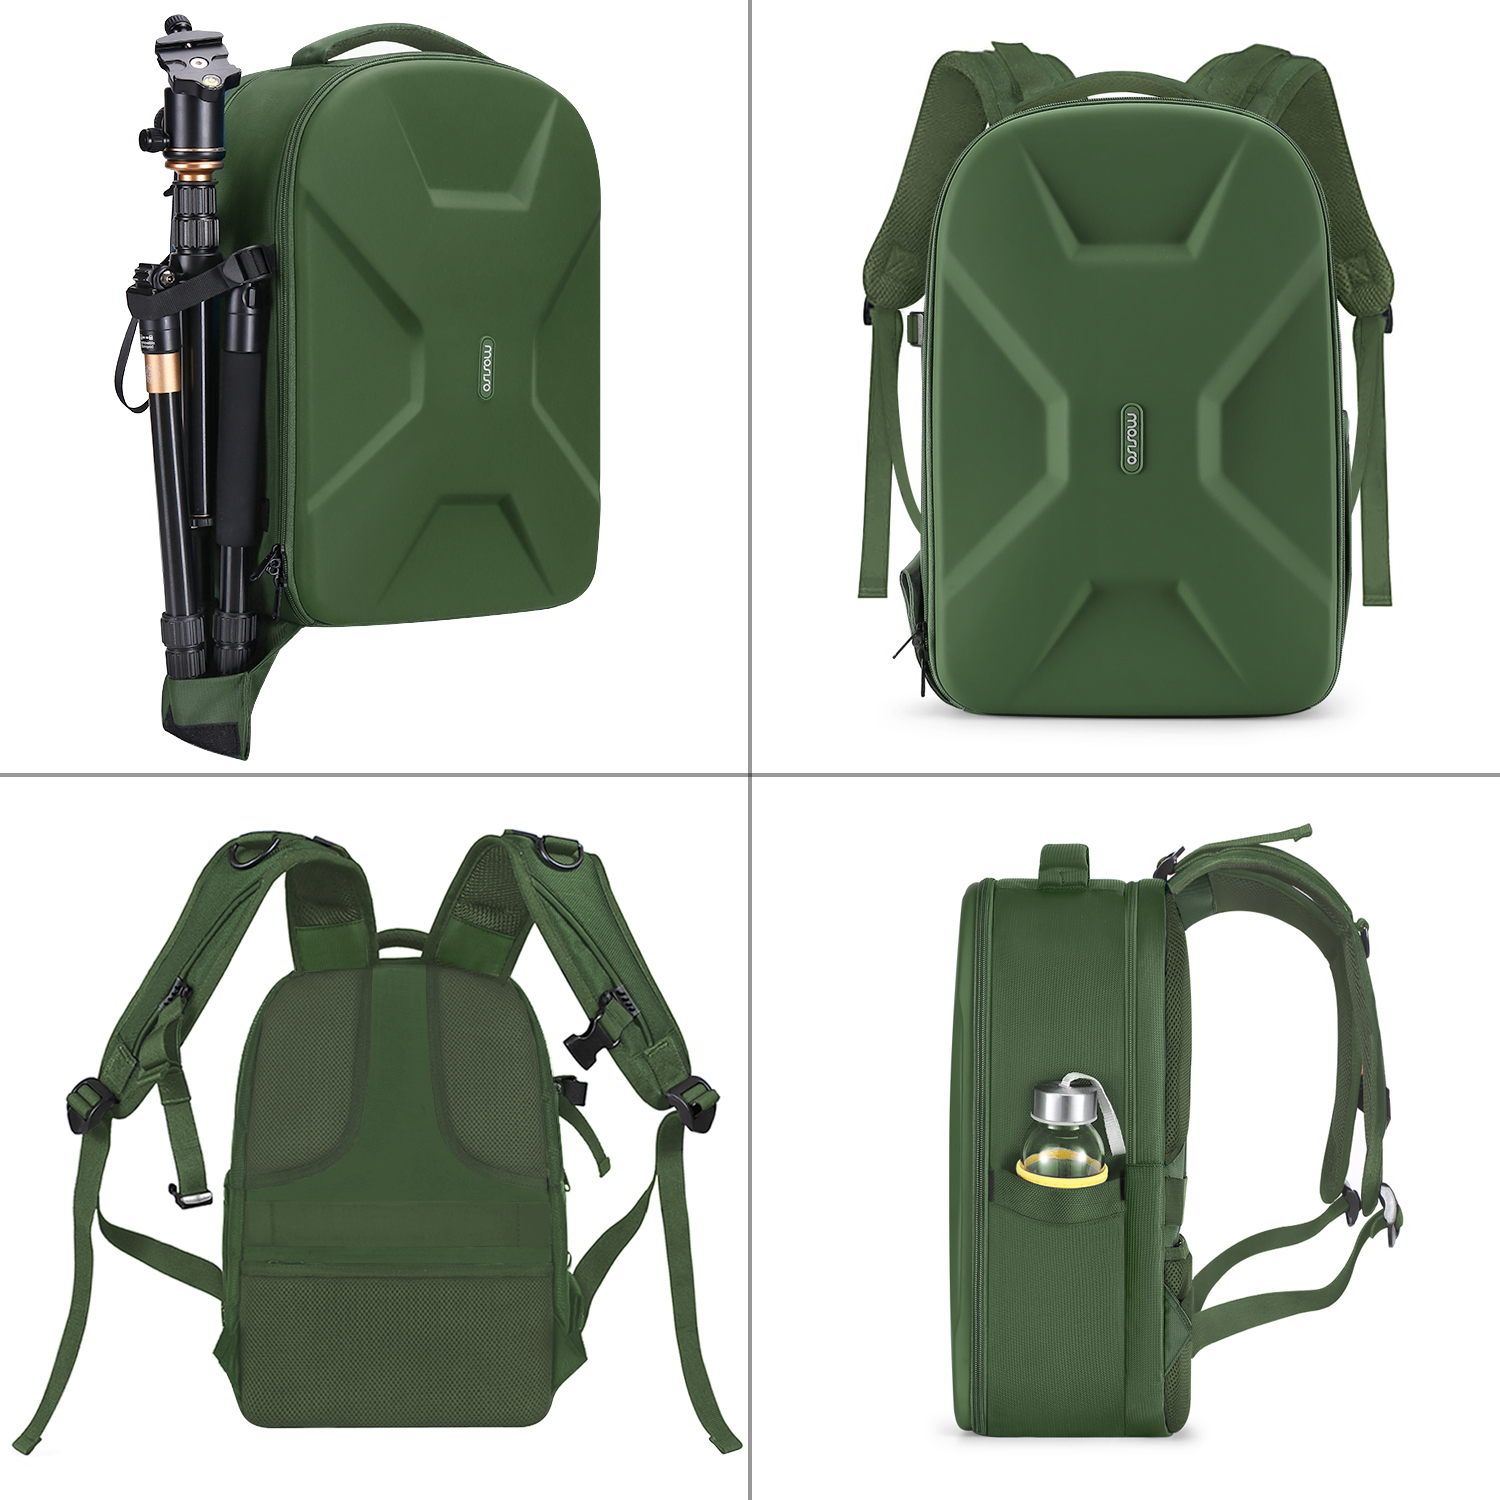 Mosiso Camera Backpack for Canon/Nikon/Sony/DJI Mavic Drone, DSLR/SLR/Mirrorless Photography Camera Bag Waterproof Hardshell Protective Case with Tripod Holder&Laptop Compartment, Army Green - image 5 of 8